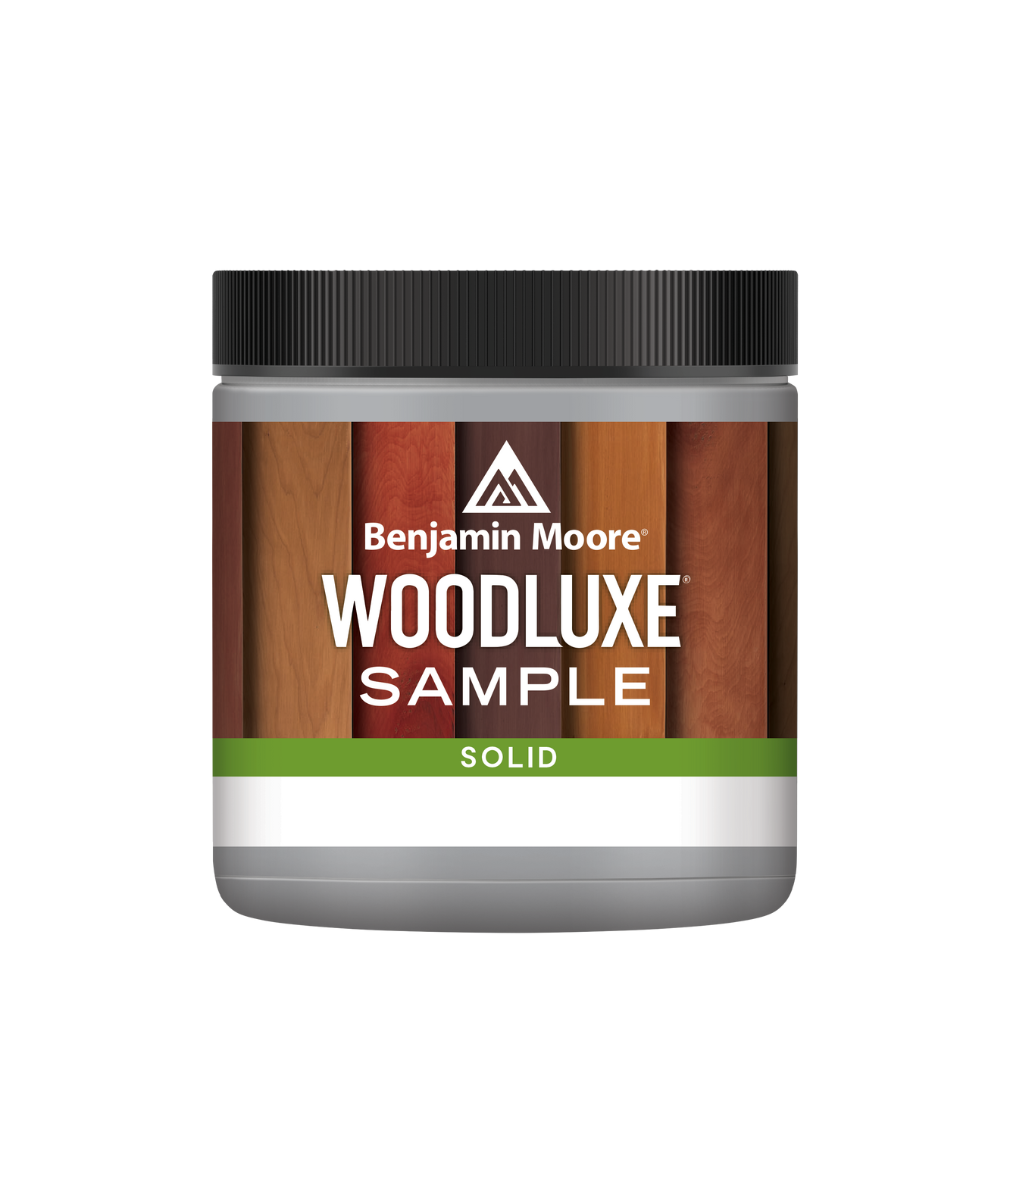 Benjamin Moore Woodluxe® Water-Based Solid Exterior Stain Half-Pint available at Catalina Paints in Pennsylvania, New Jersey & Delaware.